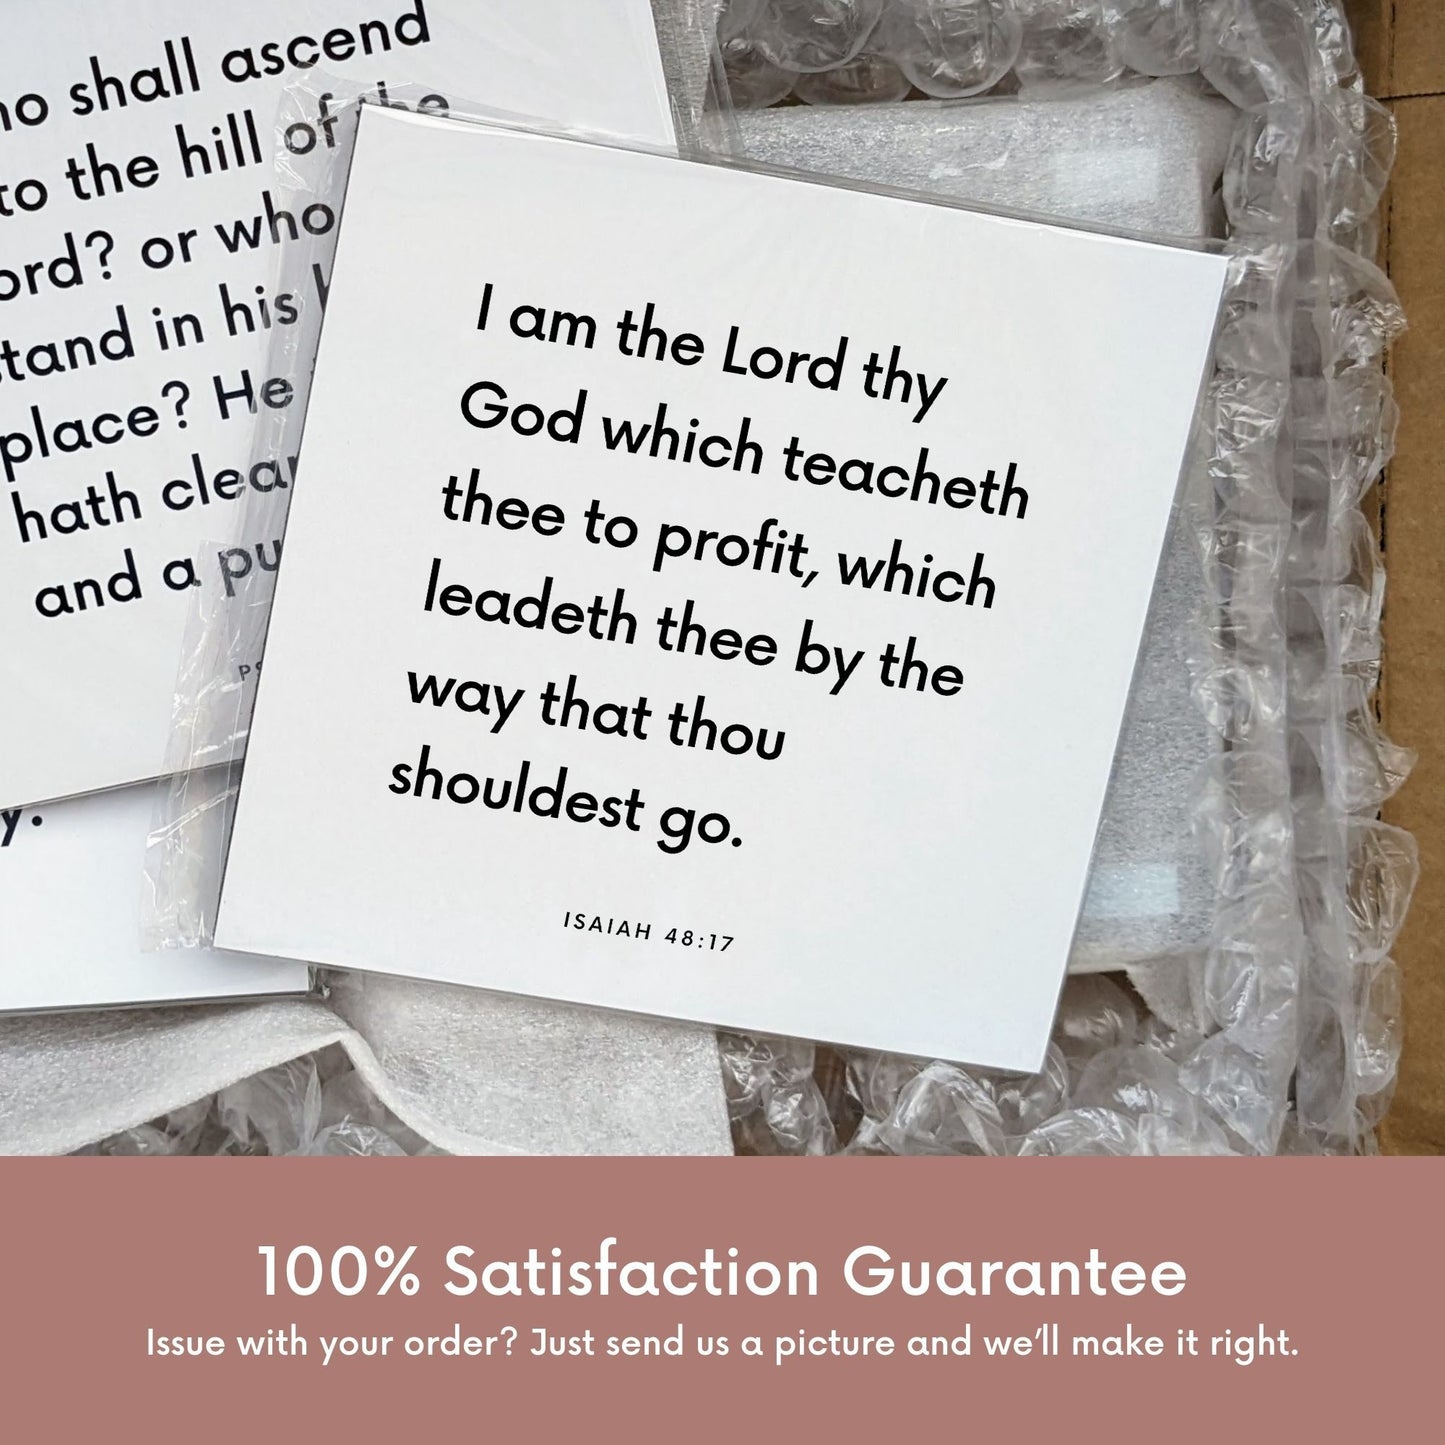 Shipping materials for scripture tile of Isaiah 48:17 - "I am the Lord thy God which teacheth thee to profit"